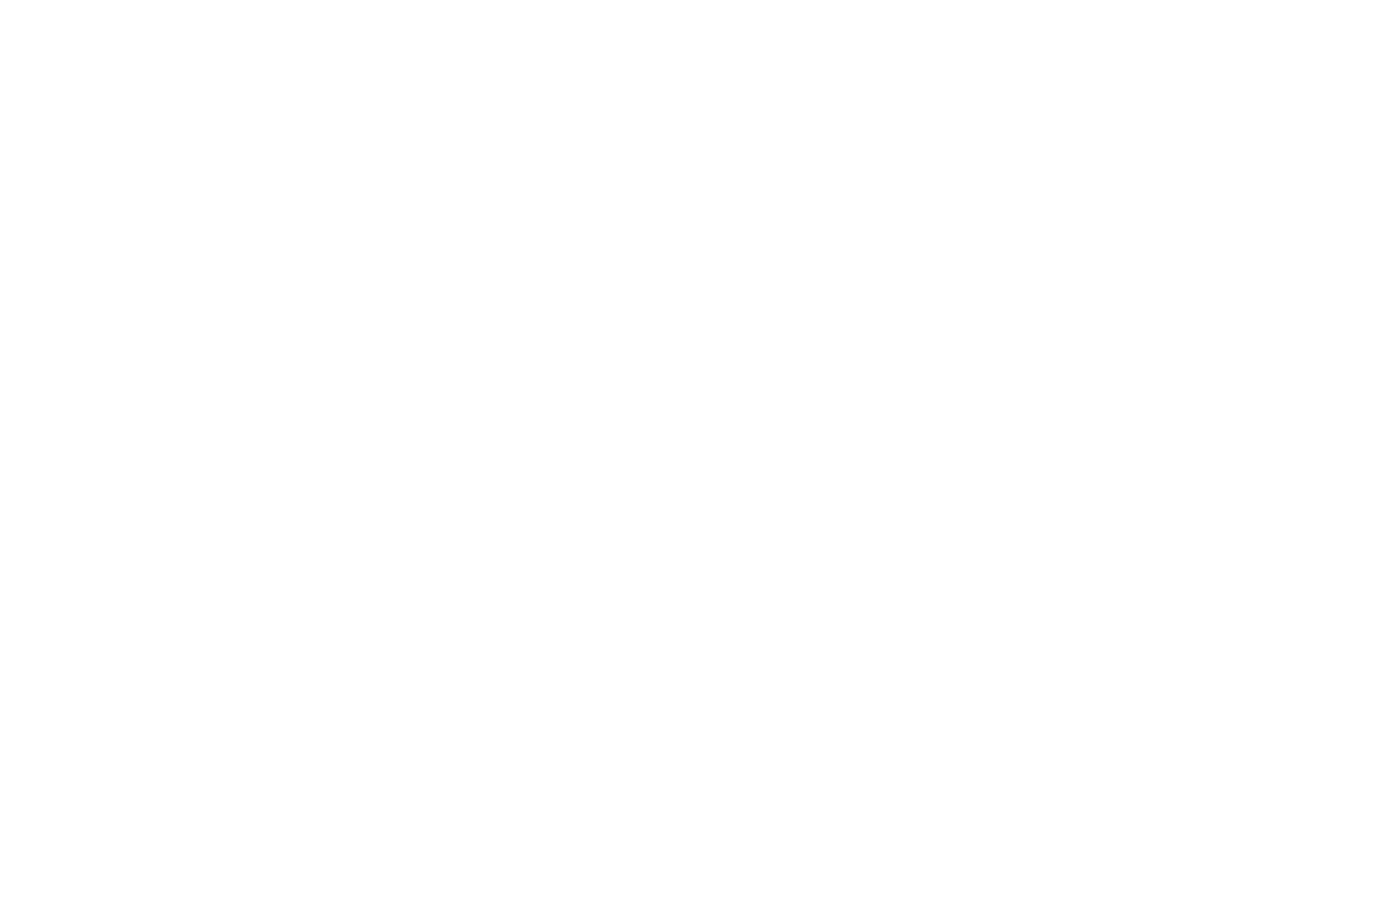 Dimension drawing of the TANK-XM810 industrial embedded system